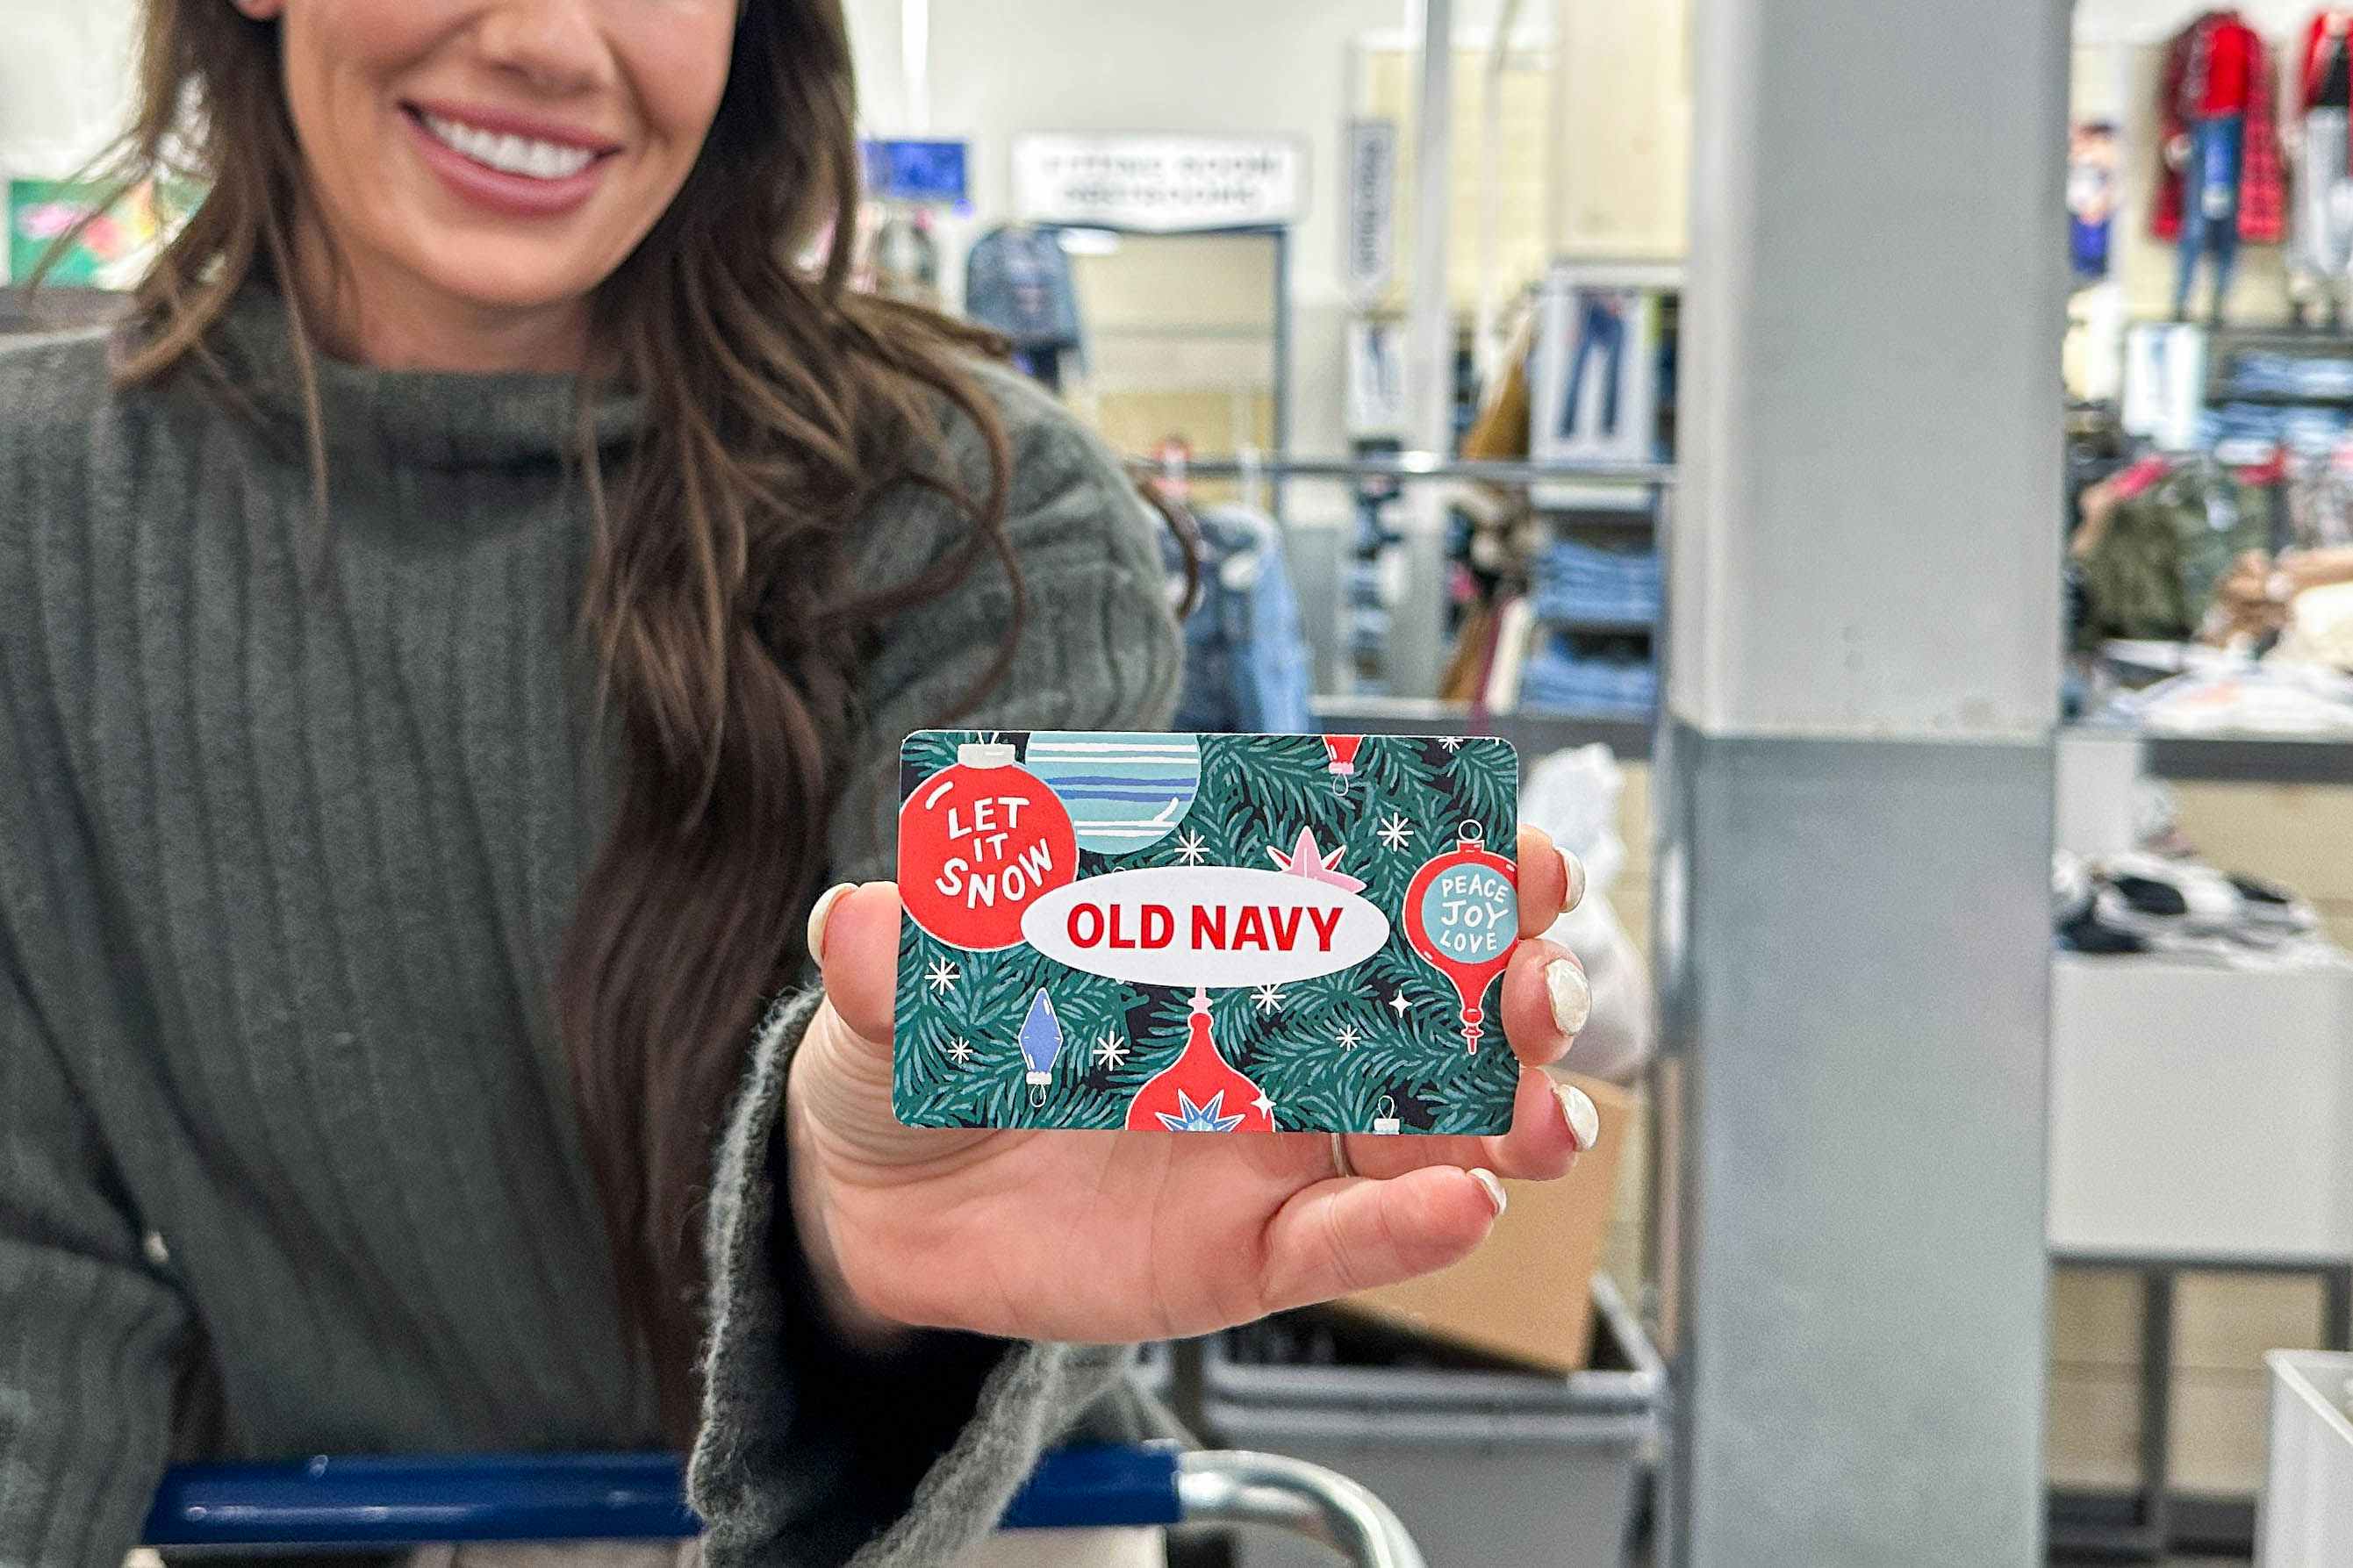 old navy gift card being held 